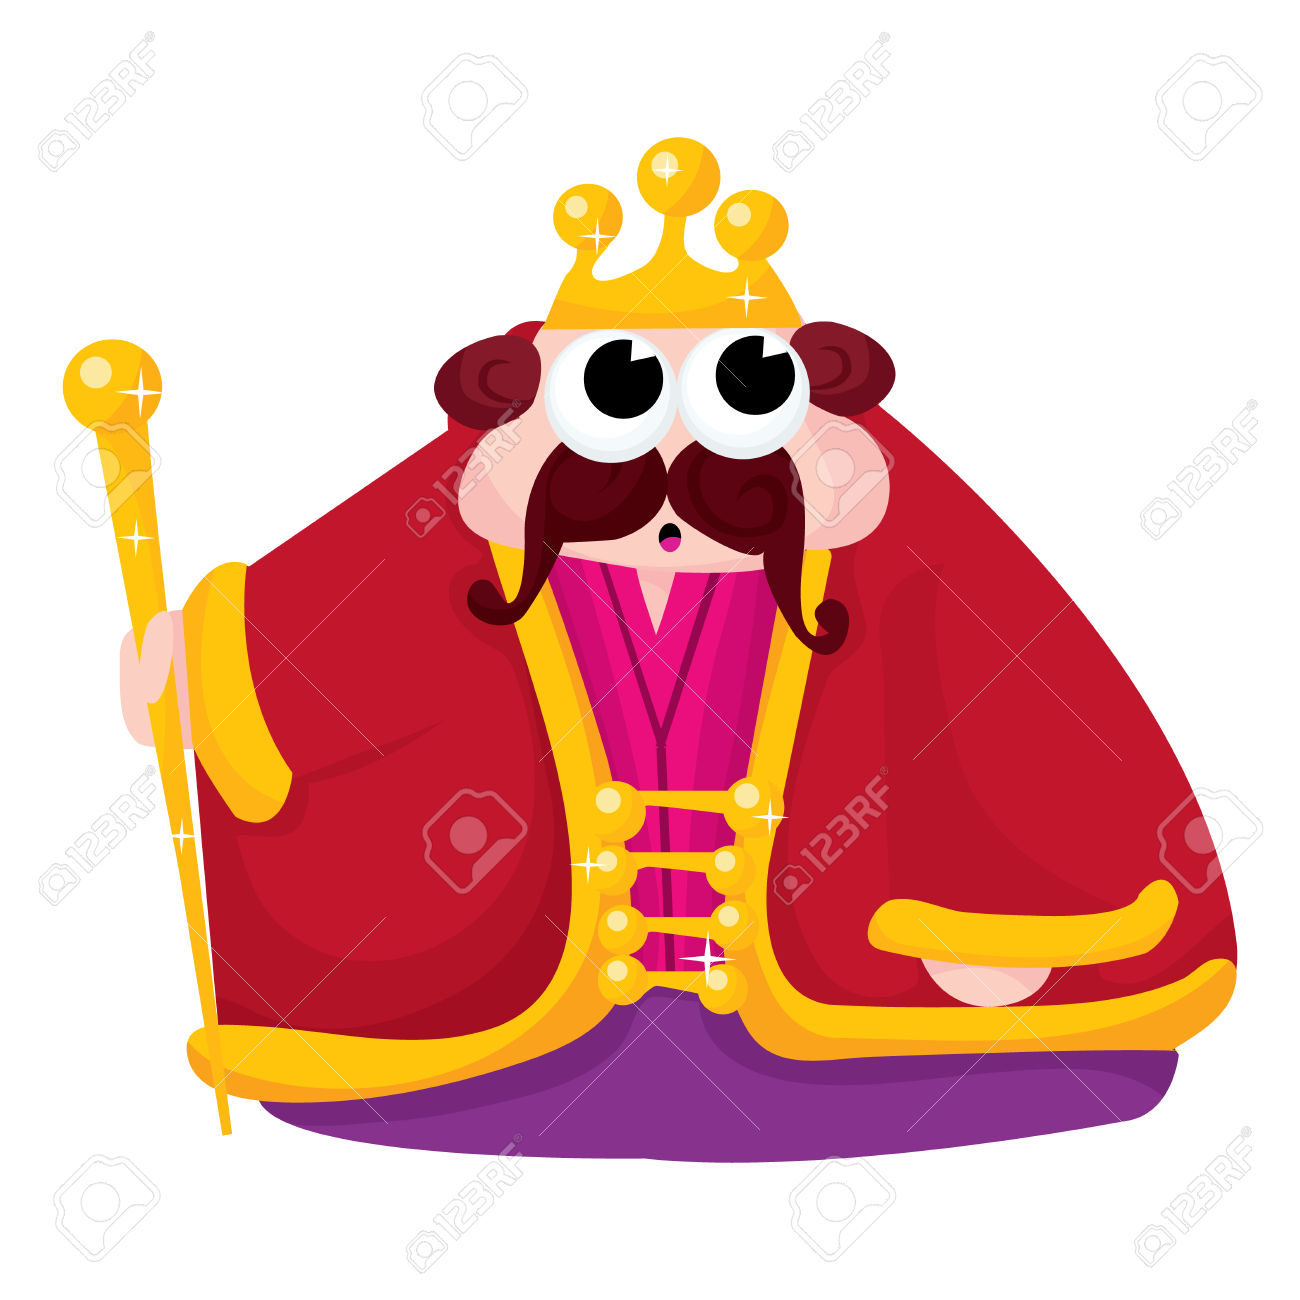 clipart of a king - photo #48